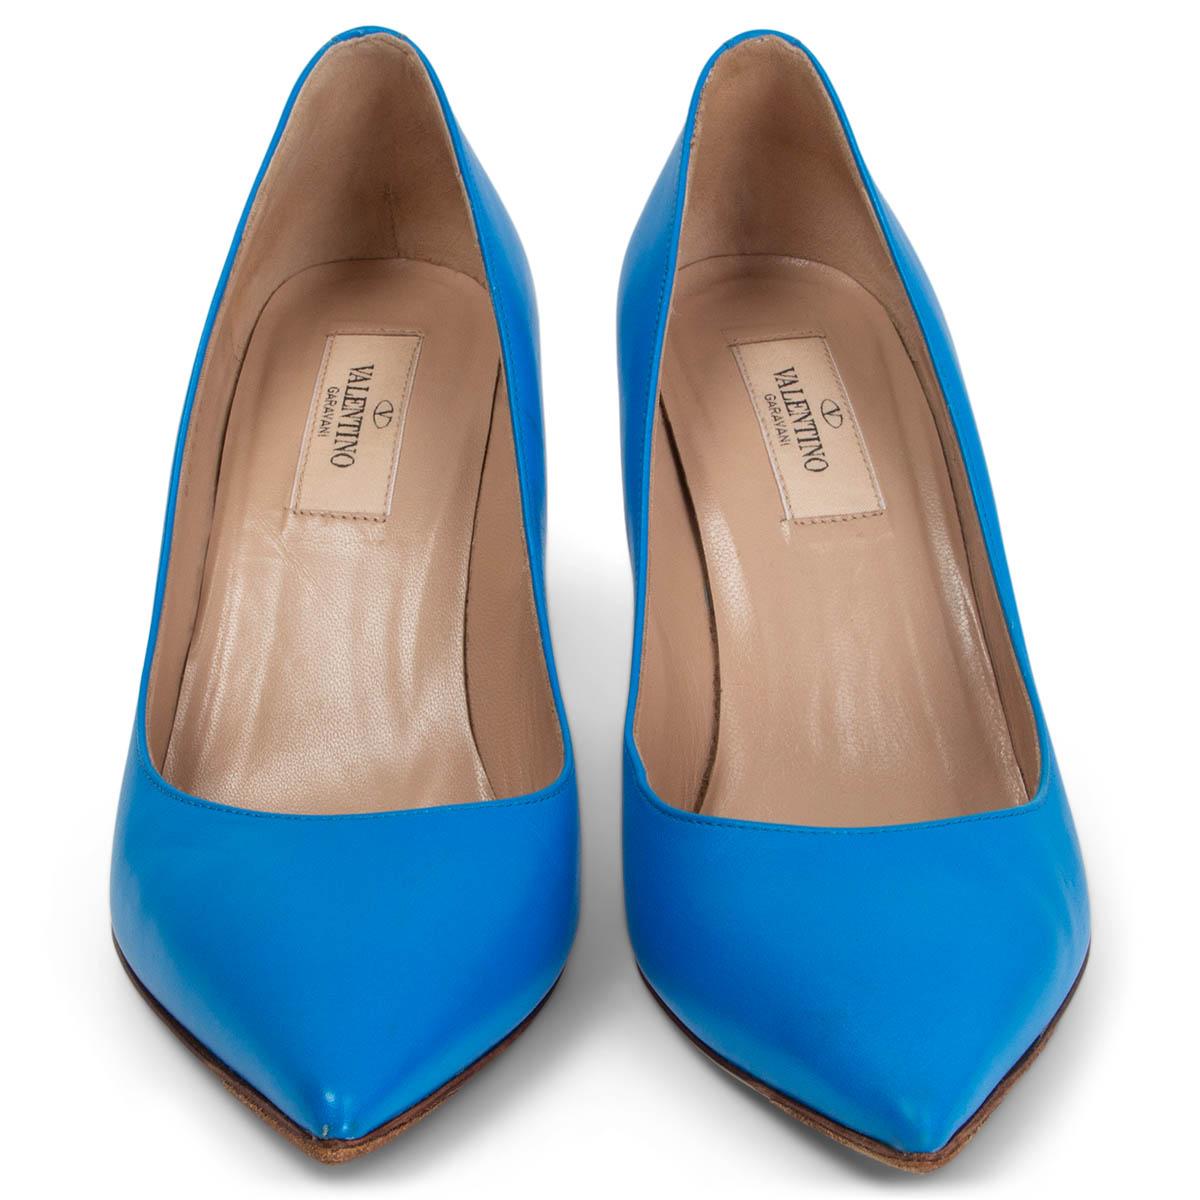 100% authentic Valentino Rockstud pointed-toe pumps in cyan blue calfskin with signature Rockstud on the heel. Have been worn with a few scratches on the heel and on the inside part of the right shoe. Overall in good condition. Come with dust bag.